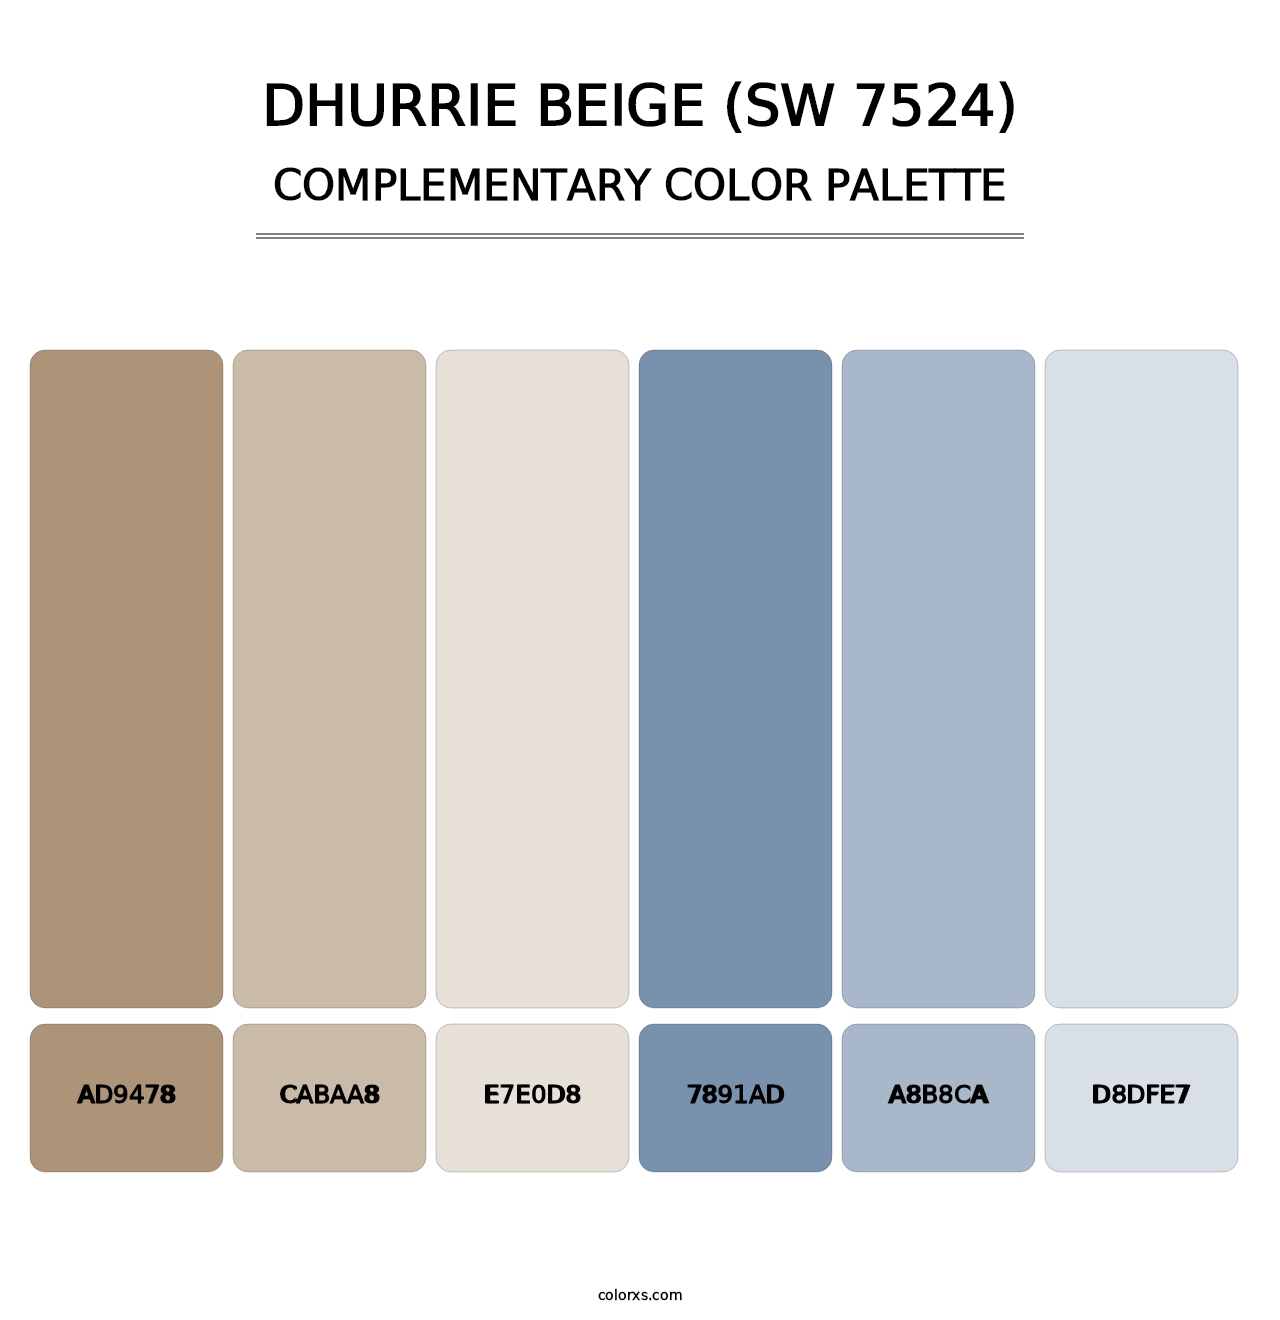 Dhurrie Beige (SW 7524) - Complementary Color Palette